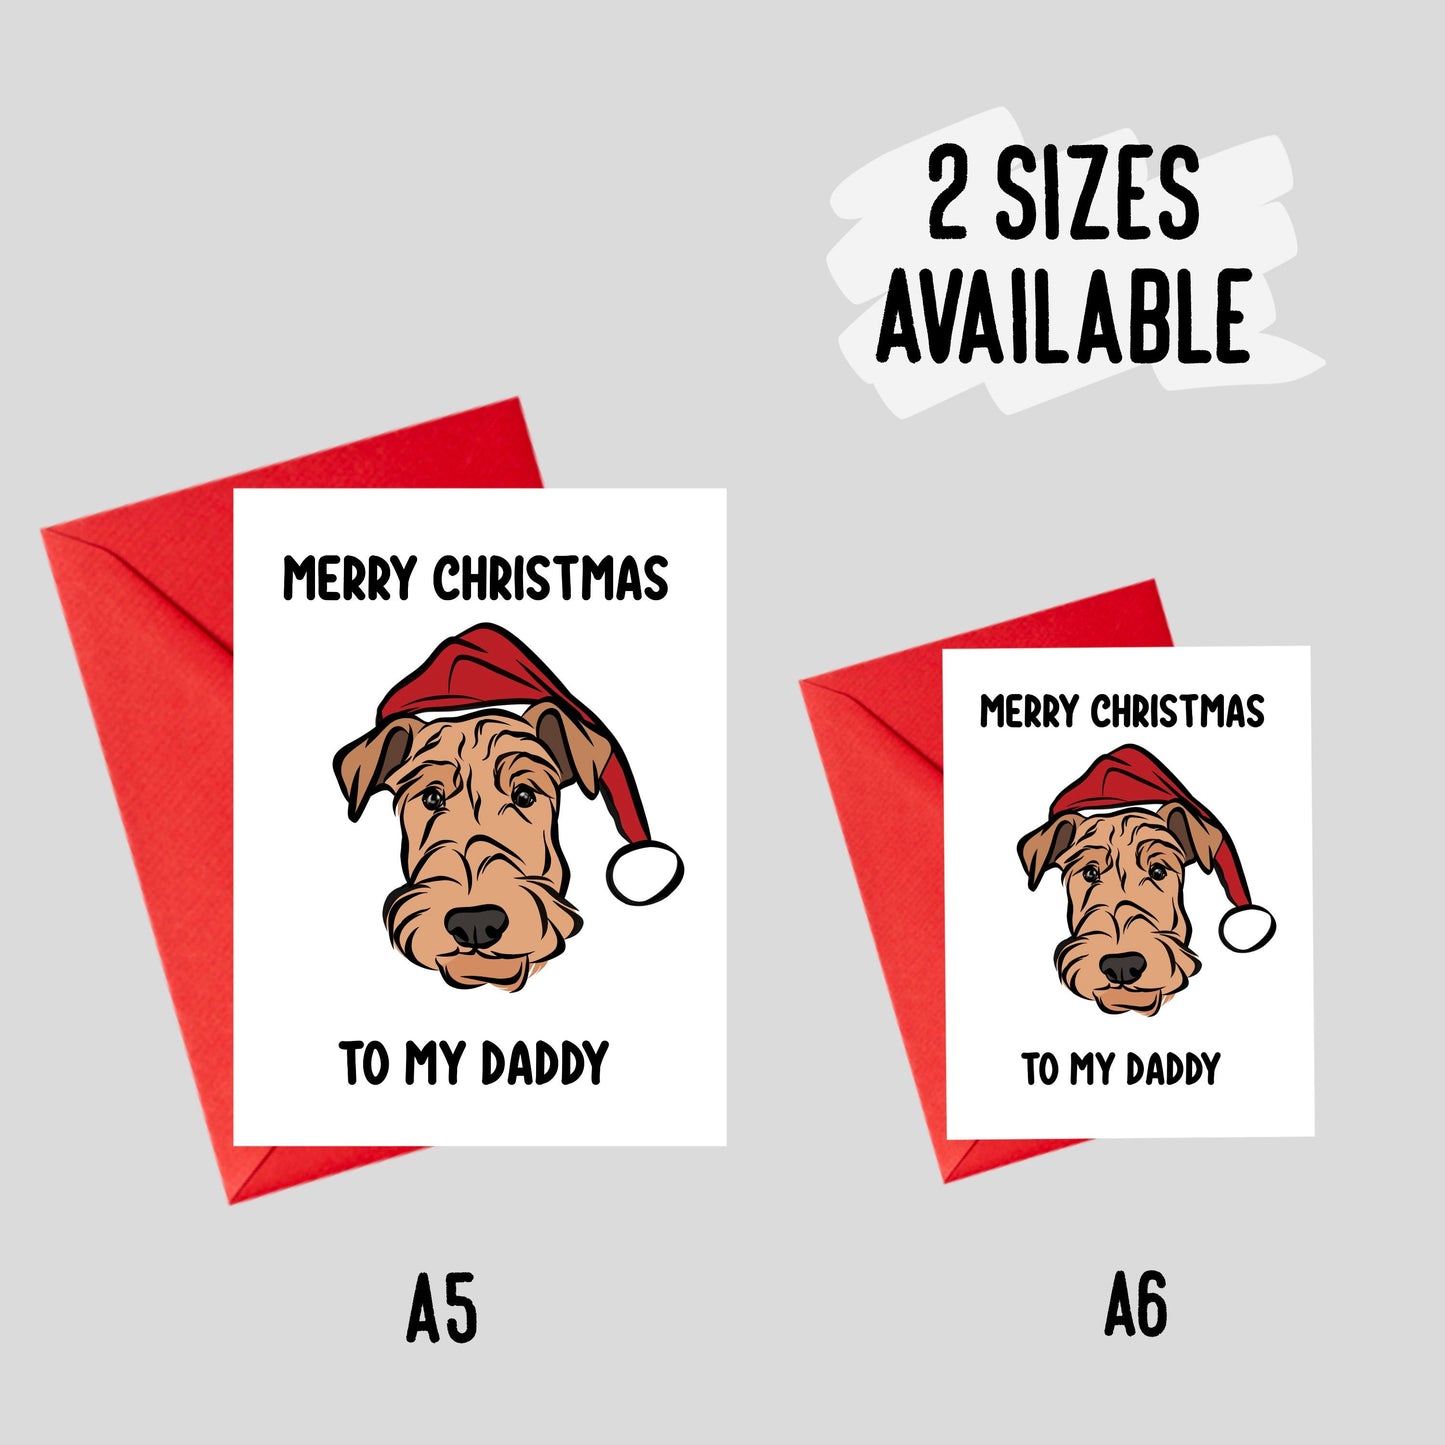 Airedale Terrier Christmas Card/ Personalised Airedale Terrier Portrait Greeting Card/ Dog Owner Customisable Message Card/ Festive Dog Card